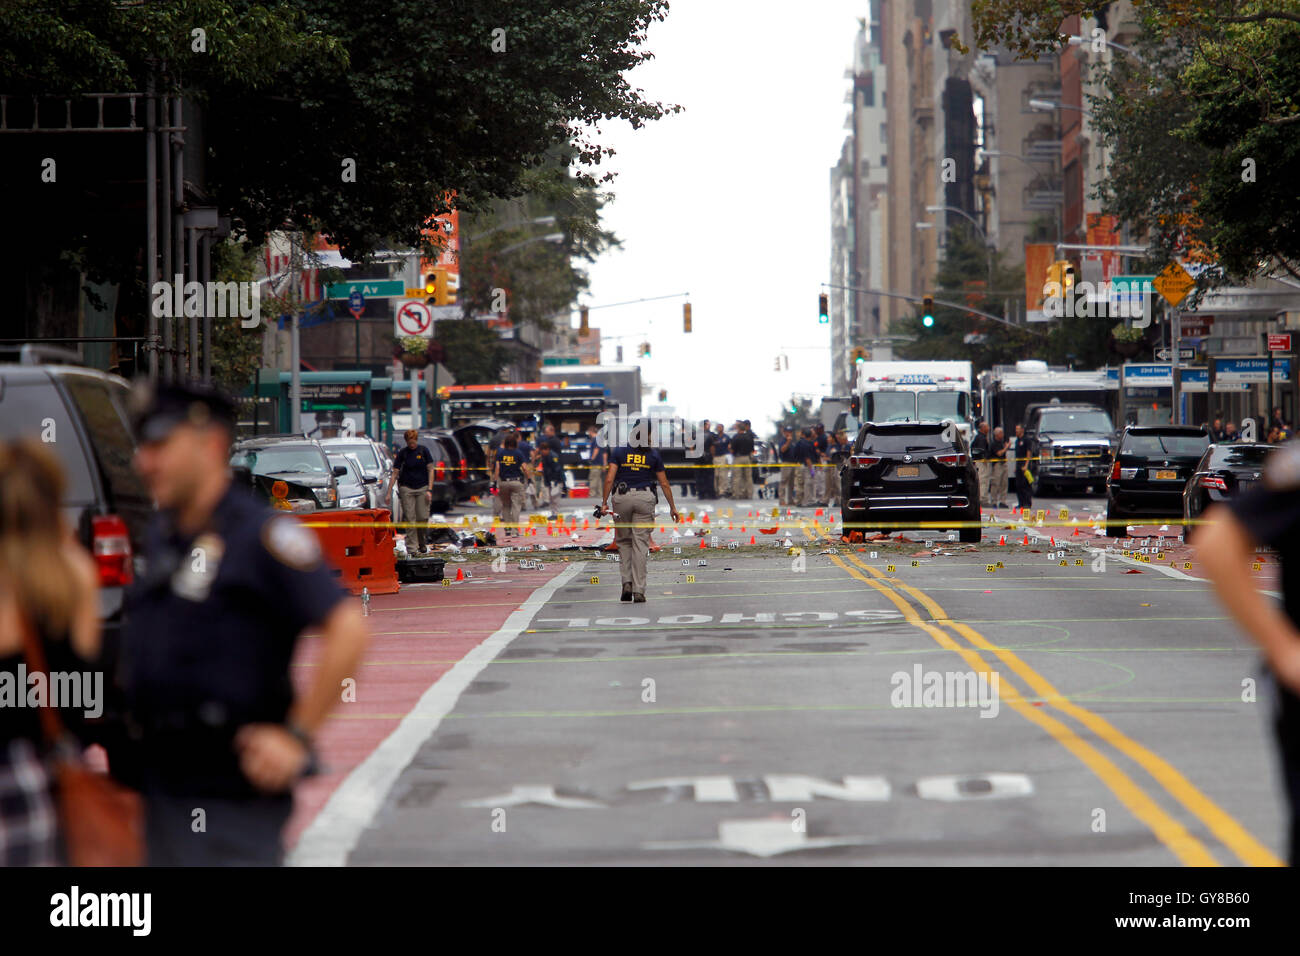 New York, USA. 18th Sep, 2016. Police, and law enforcement personnel from various agencies examine the area for clues after last night's explosion on New York's West 23rd Street between 6th and 7th Avenues in the Chelsea section of Manhattan. the view is looking east on 23rd street from 7th Avenue towards 6th Avenue. The area is marked for clues amidst the debris. 29 people were injured in the blast which has been described by officials as intentional. Credit:  Adam Stoltman/Alamy Live News Stock Photo